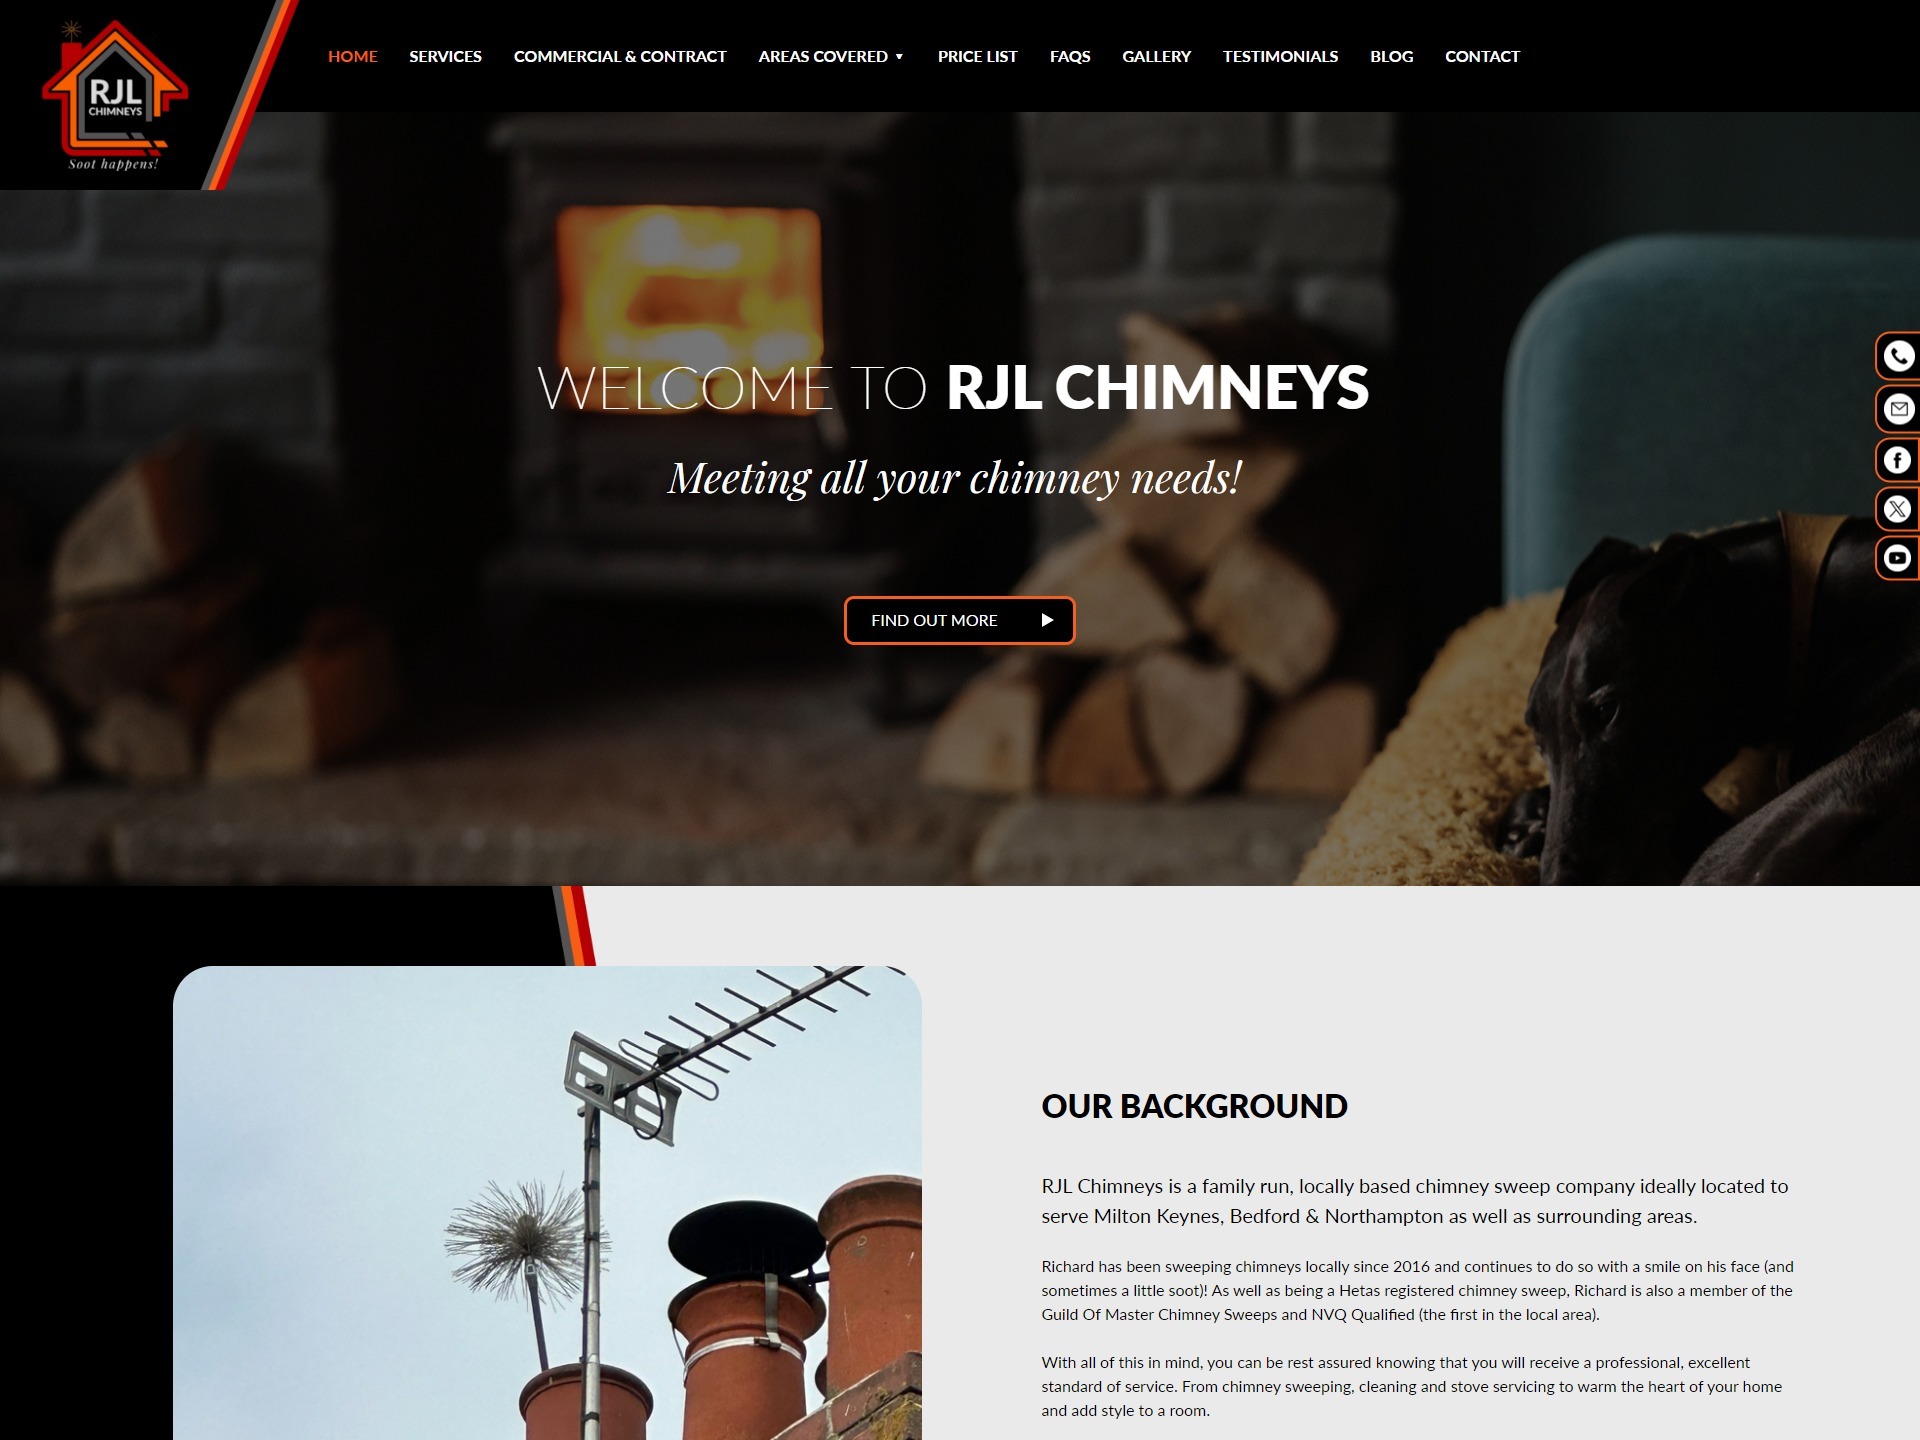 The redesign of PJL Chimneys